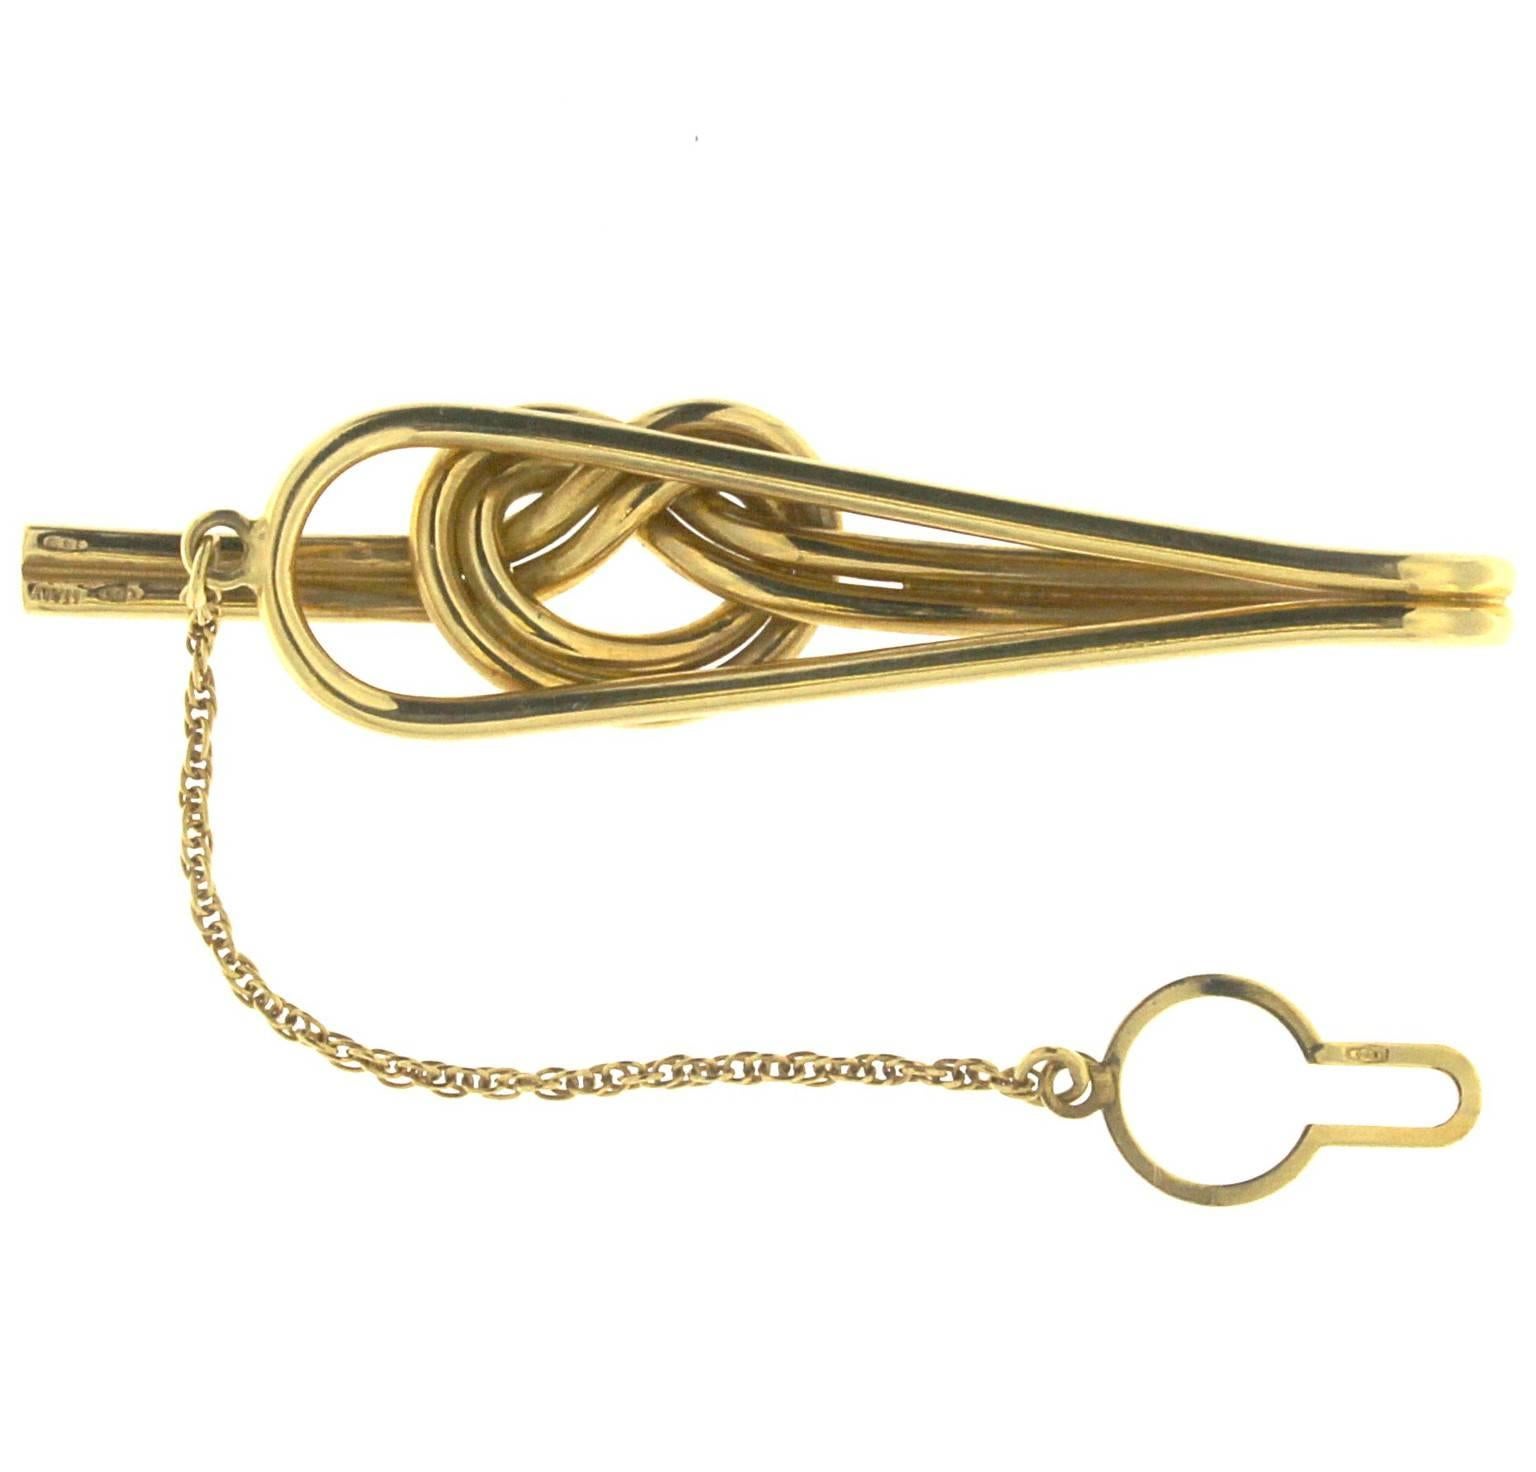 The Tie clip has been realized with 2 lines of yellow 18 kt gold mm 2.00 with a delicate chain (6 cm long) and at the end a classic button attachment 
Total 18kt gold weight: gr 16.70
Stamp: 10MI, 750
